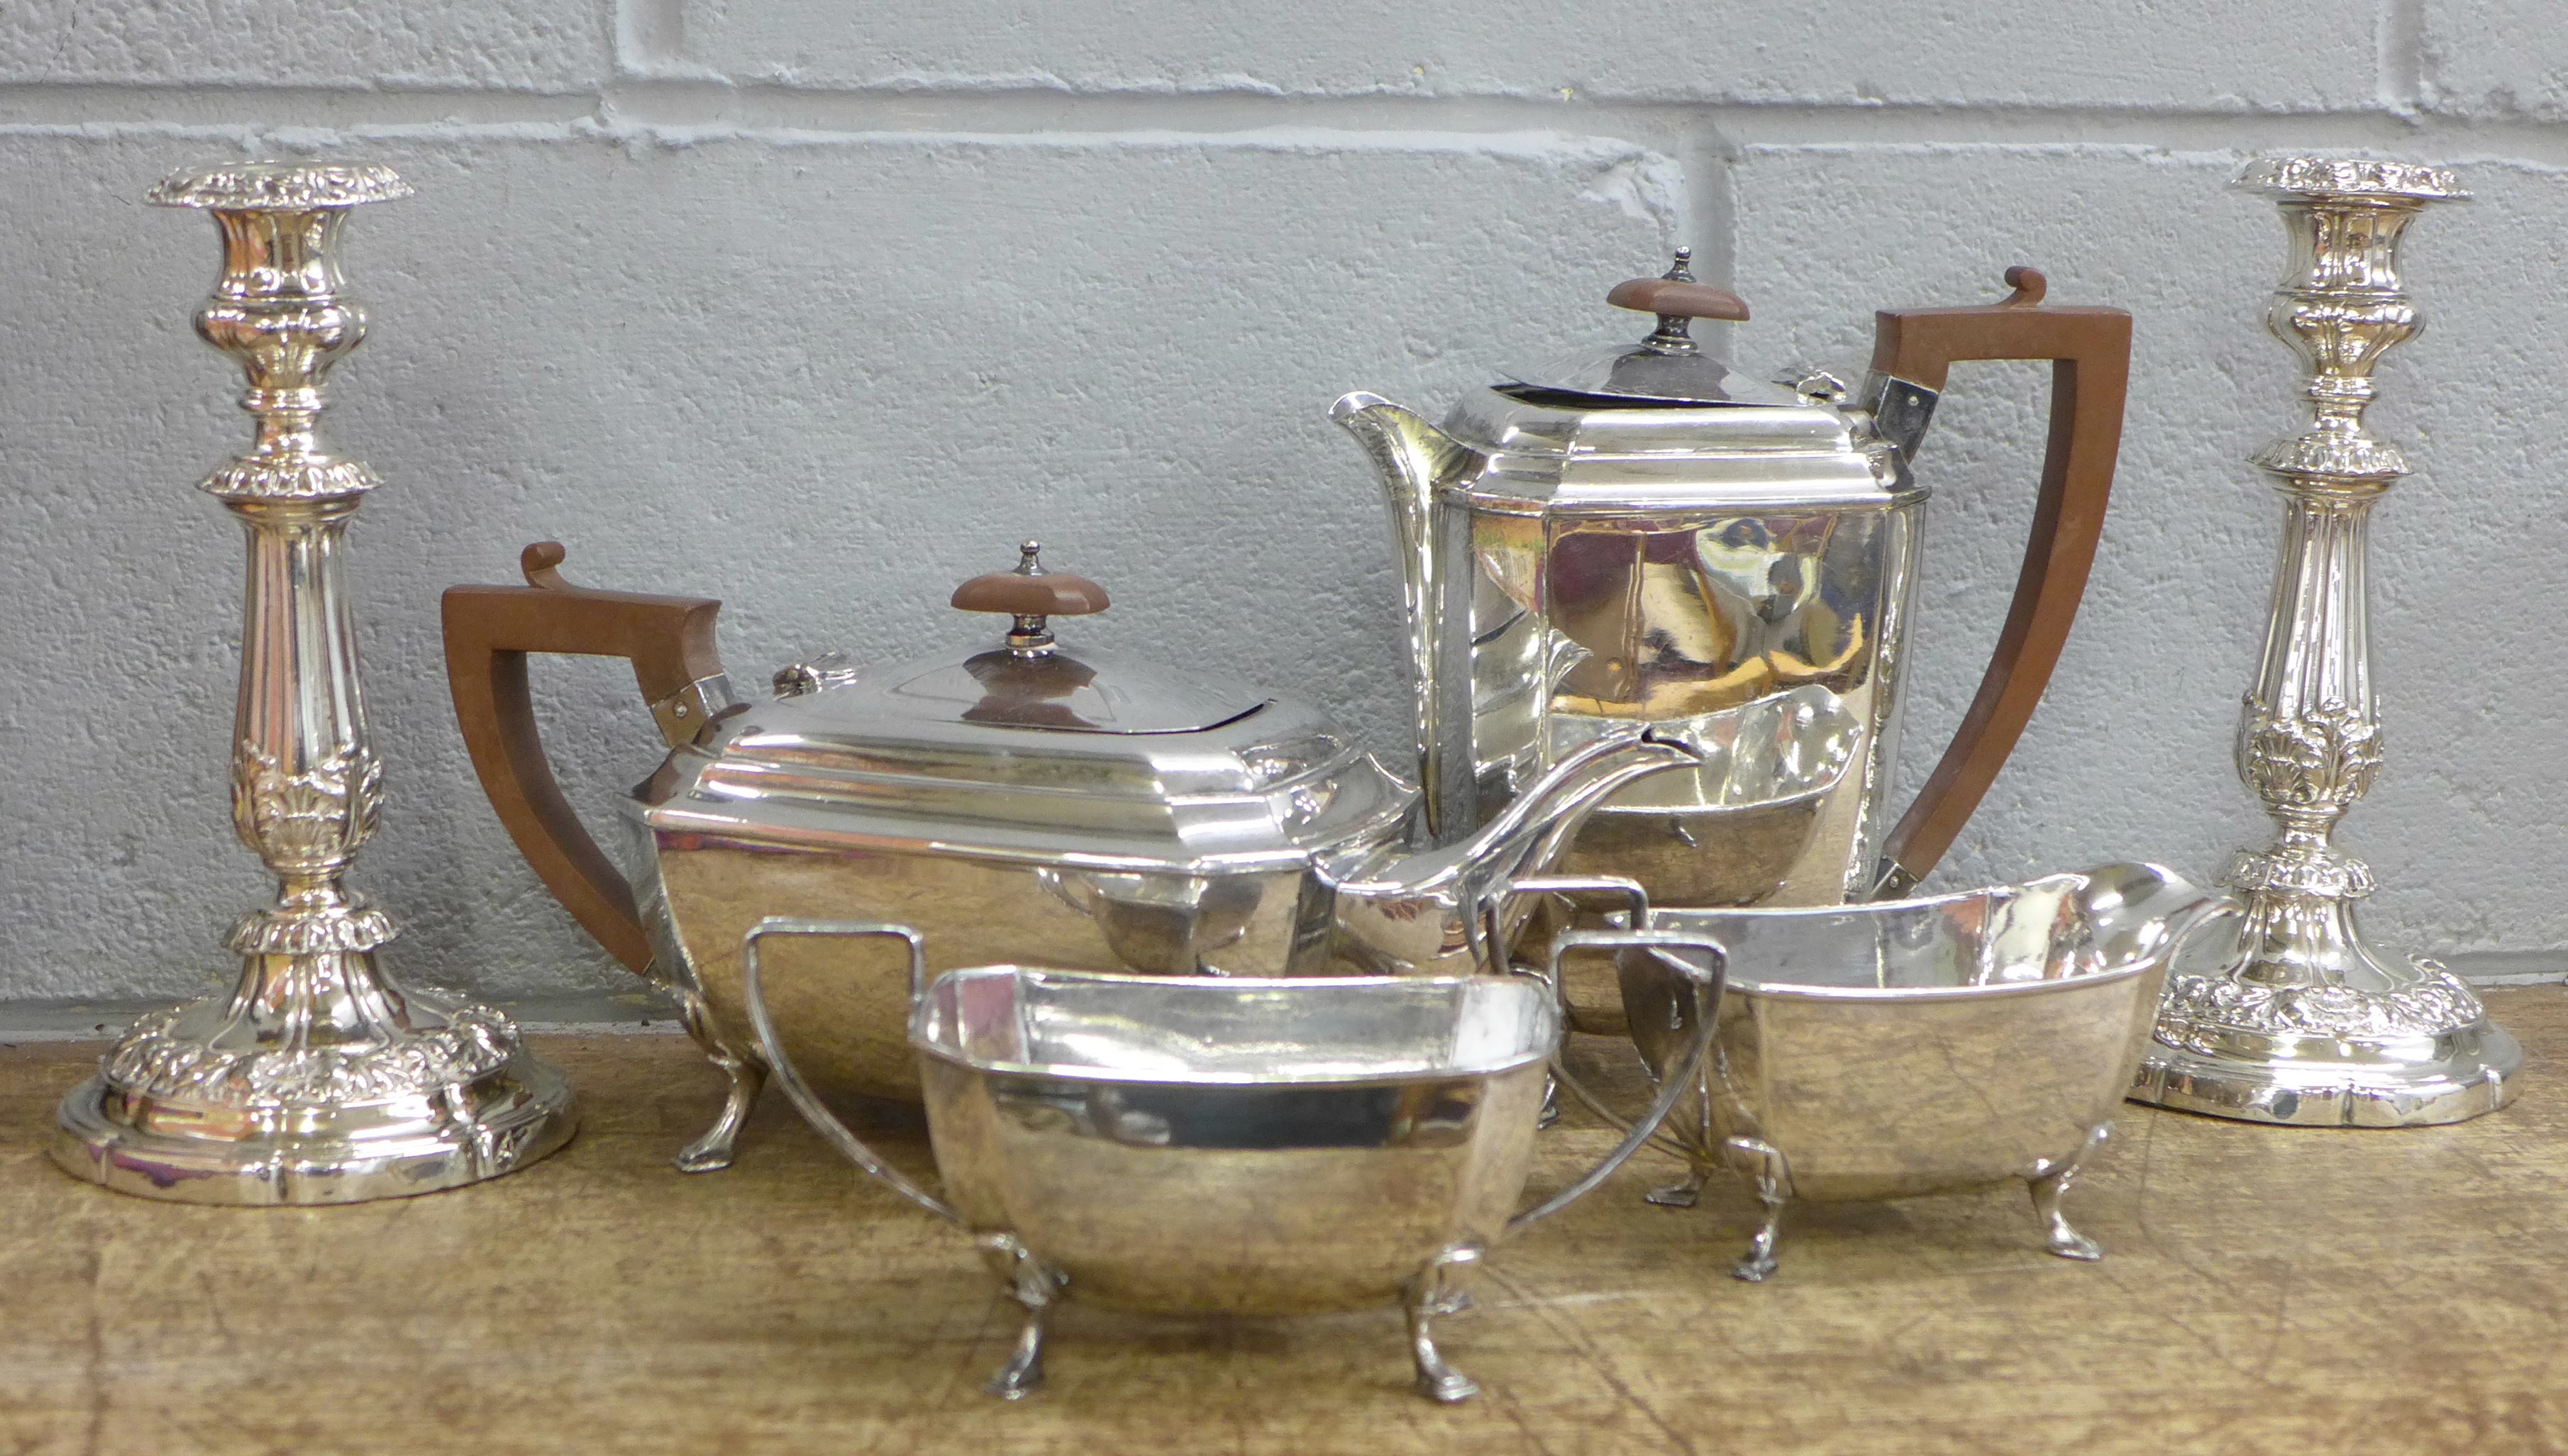 A pair of plated candlesticks and a four piece plated tea service